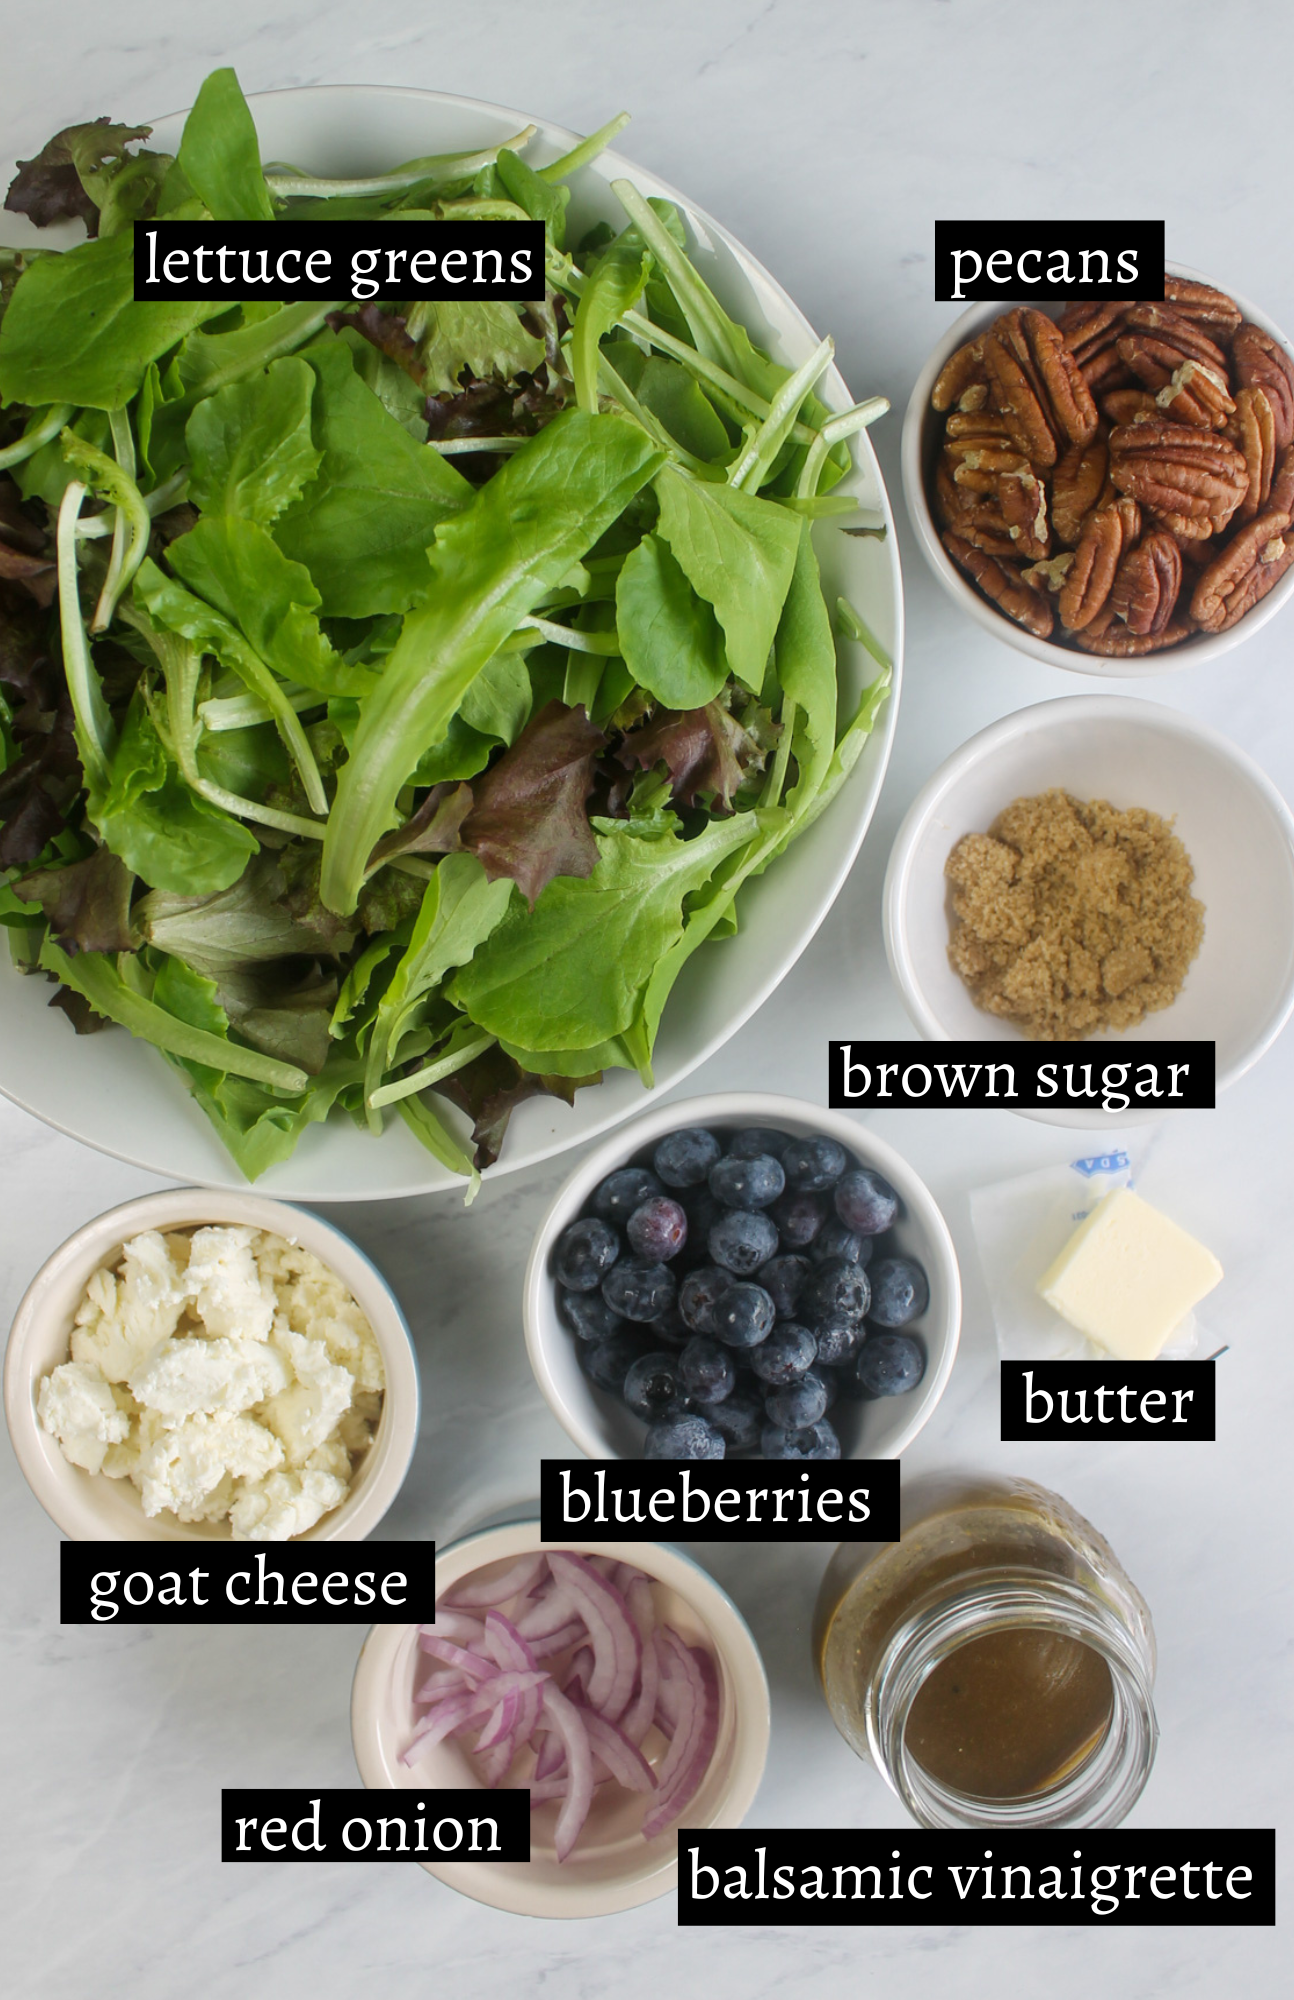 Labeled ingredients for blueberry goat cheese salad.